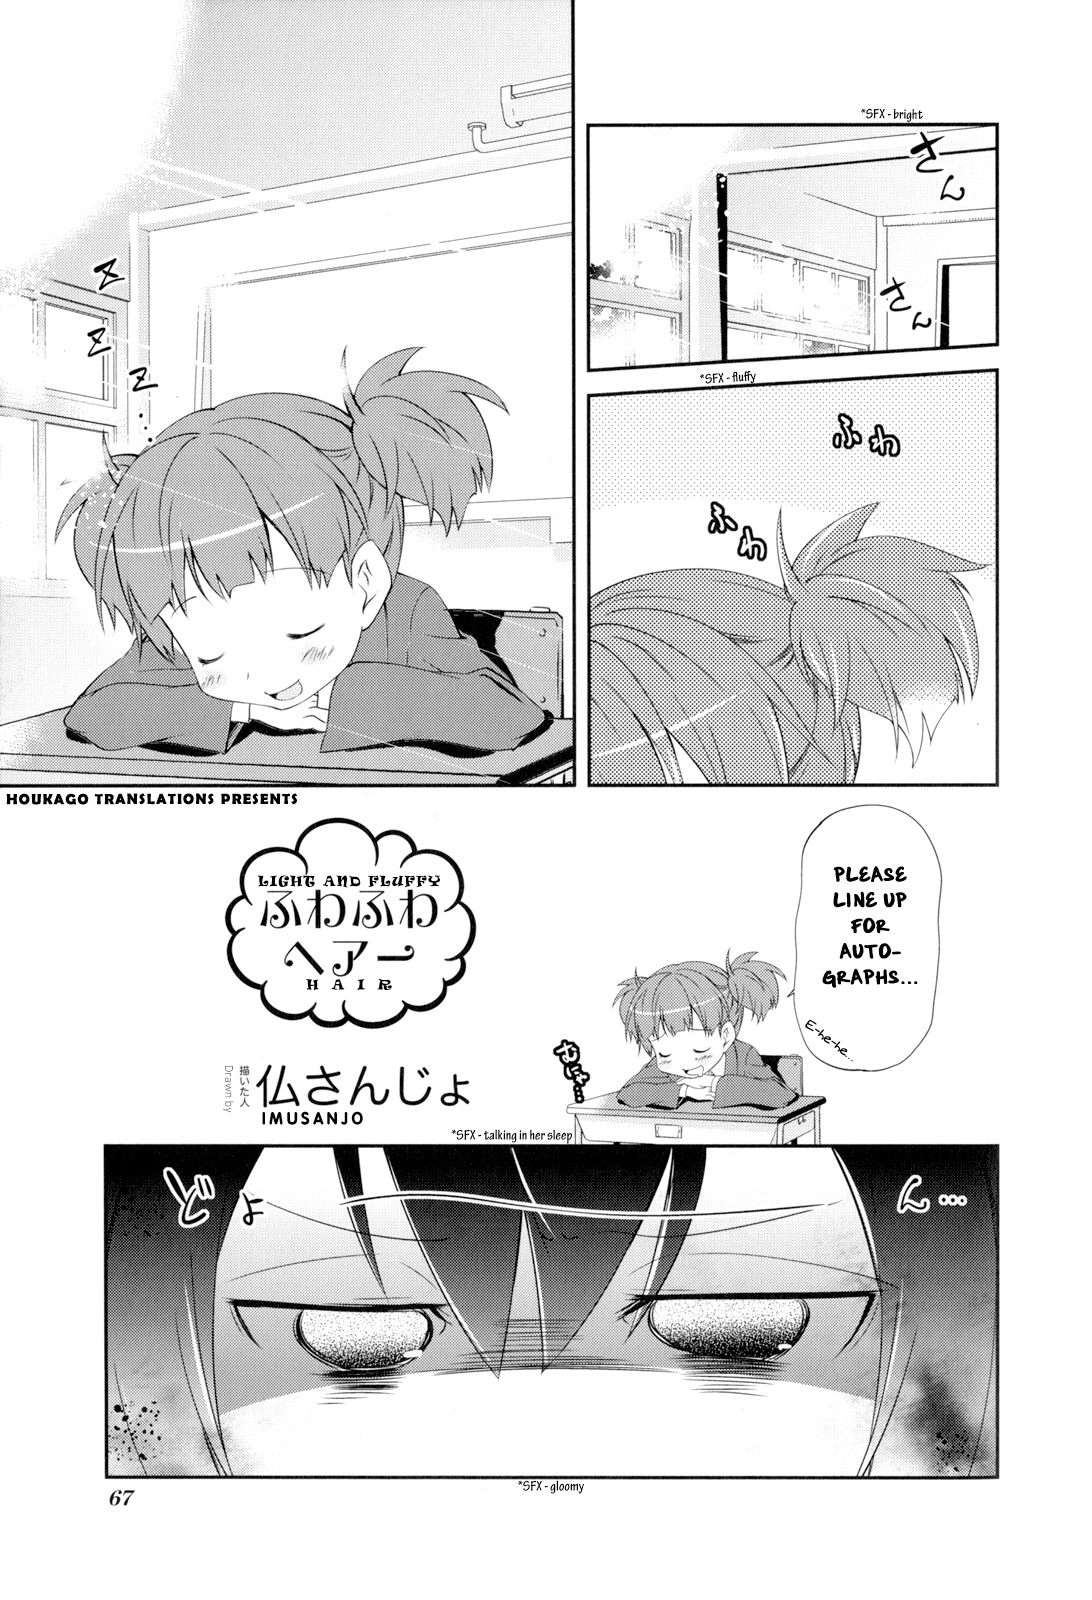 K ON! Story Anthology Comic Vol. 2 Ch. 26 Light and Fluffy Hair (by Imusanjo)